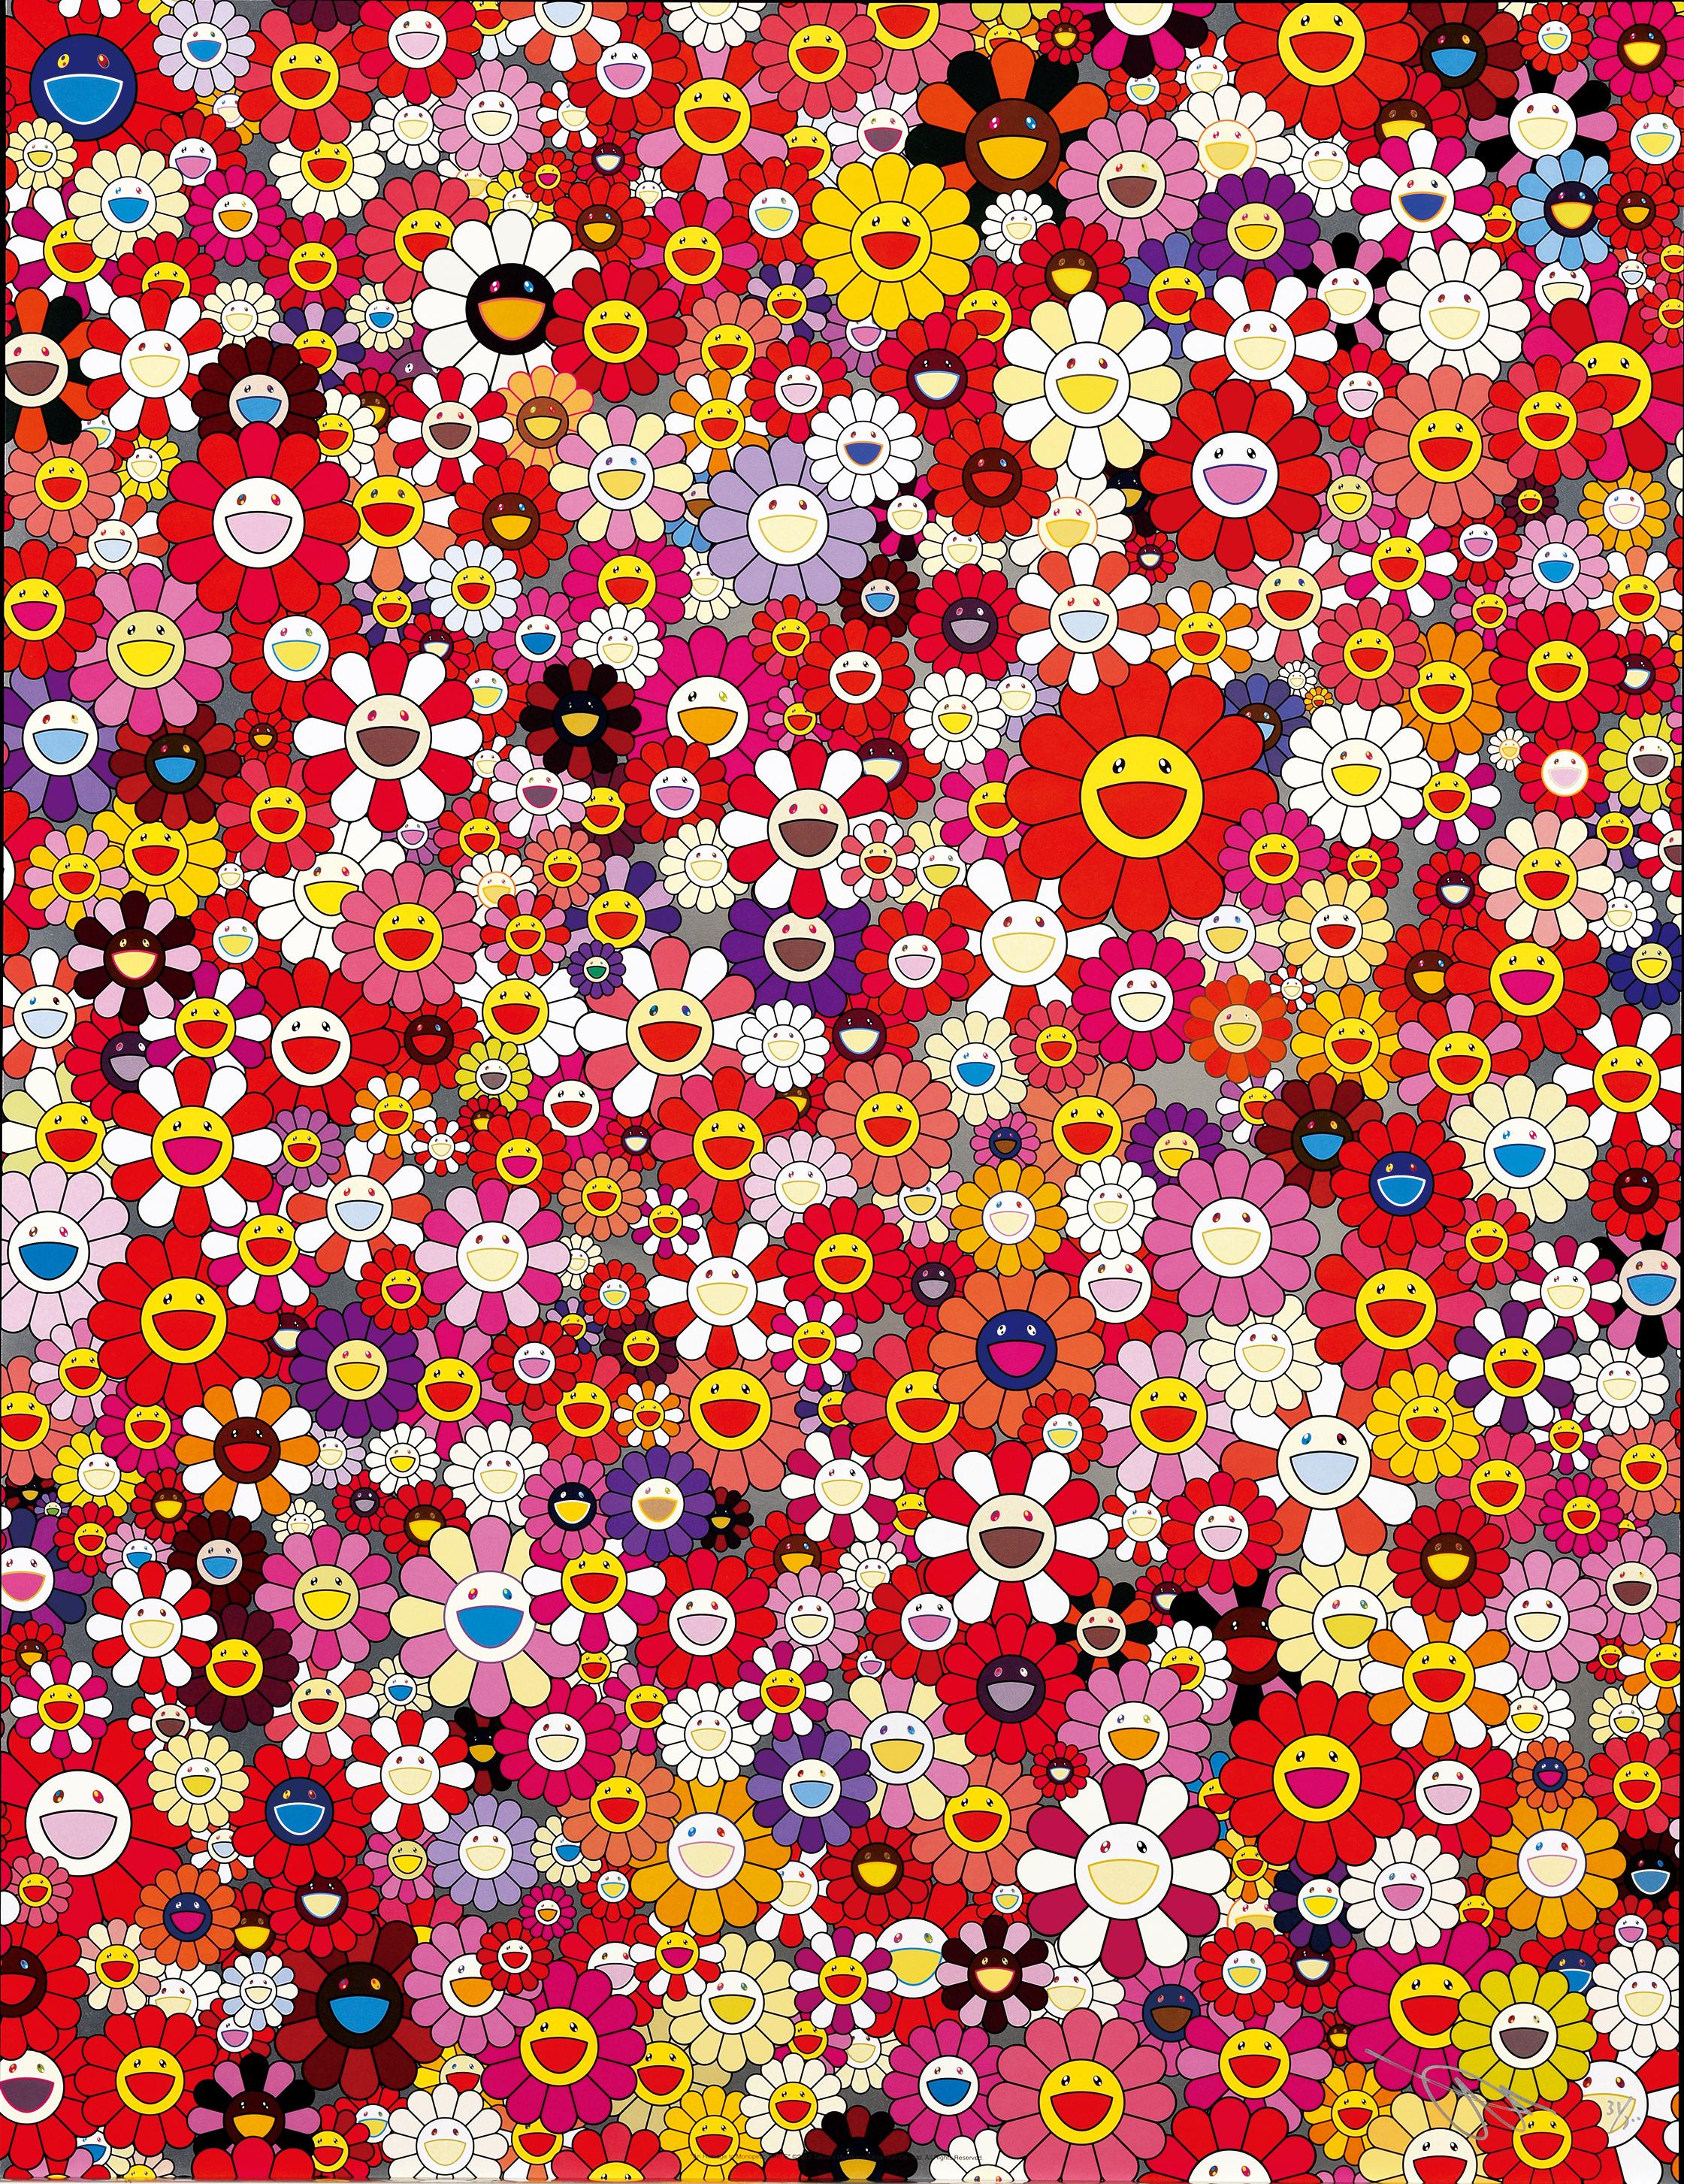 An Homage to Monopink, 1960E, 2012 by Takashi Murakami
Offset print, numbered and signed by the artist
27 1/10 × 20 9/10 in
68.8 × 53 cm
Edition  31/300

Takashi Murakami is best known for his contemporary combination of fine art and pop culture. He